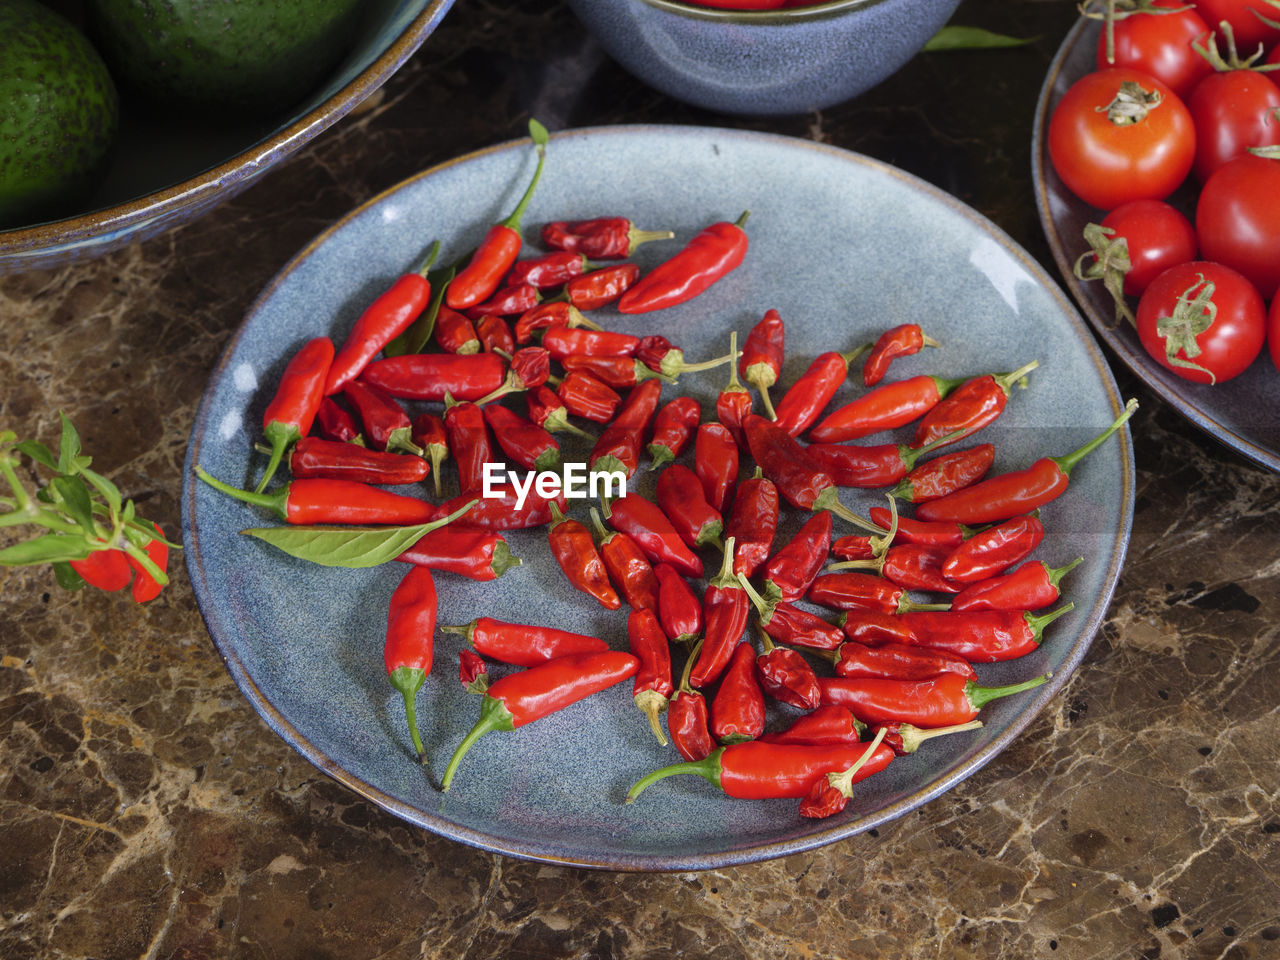 High angle view of red chili peppers in bowl